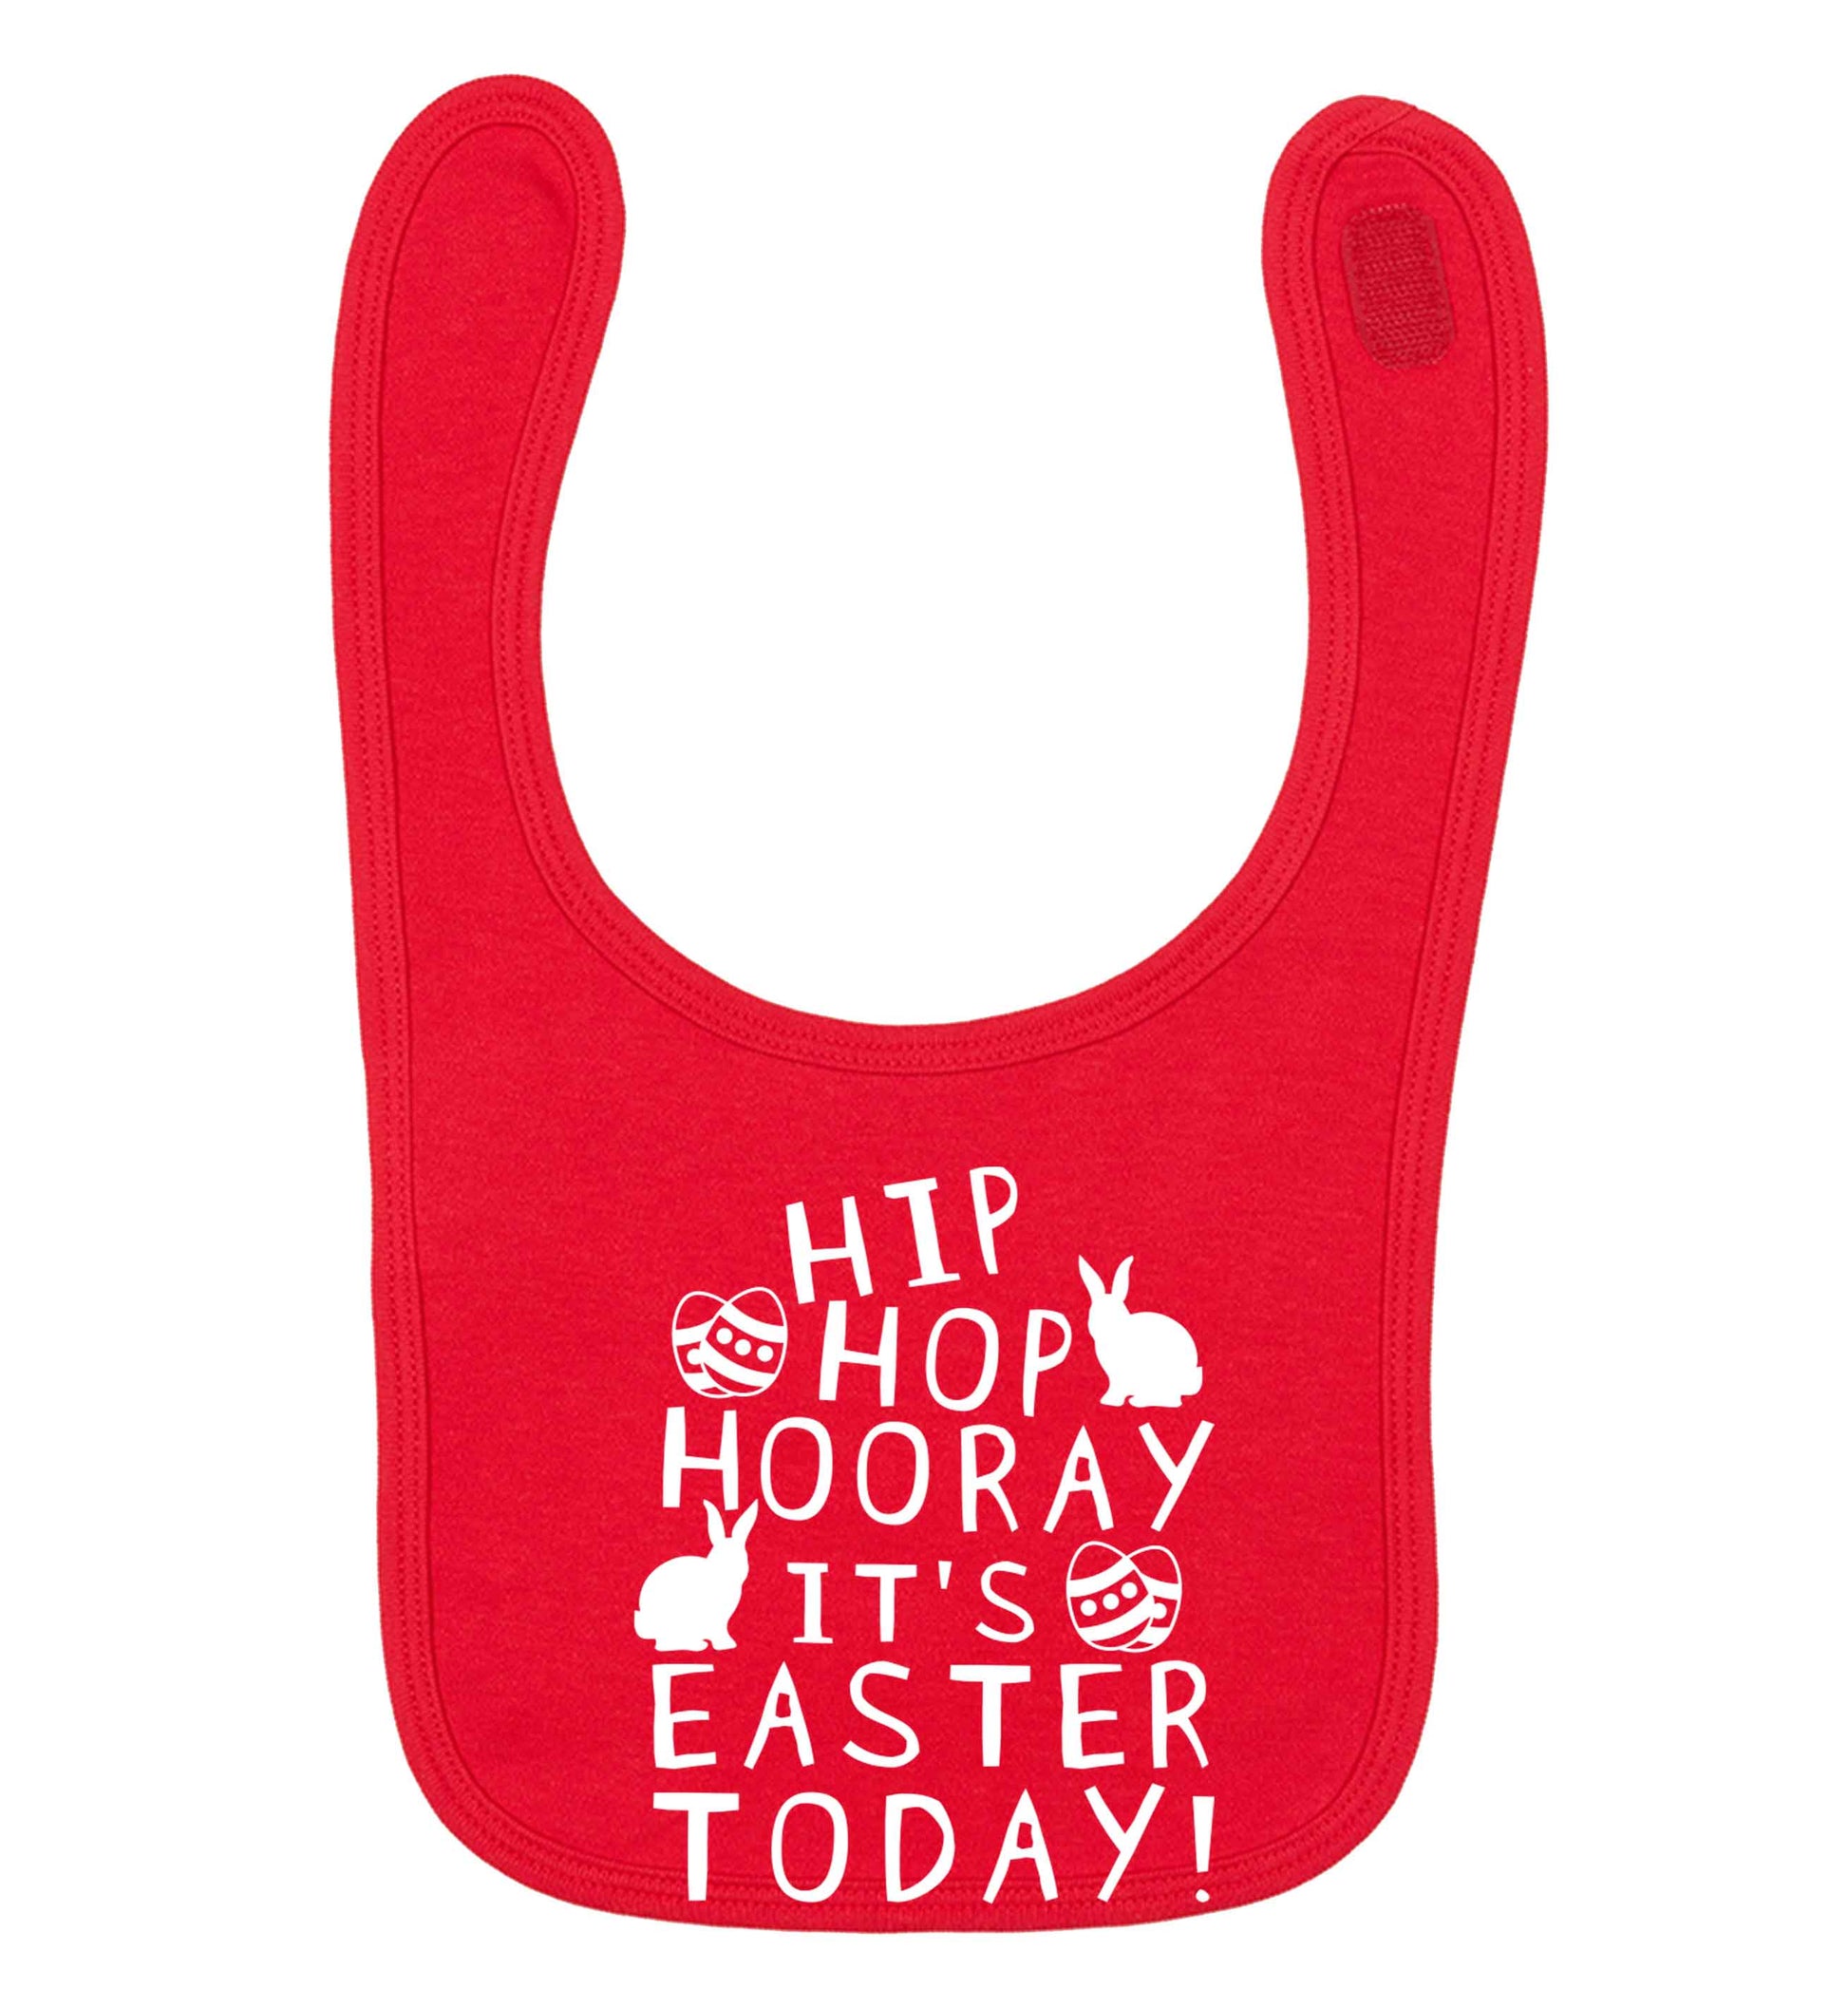 Hip hip hooray it's Easter today! red baby bib